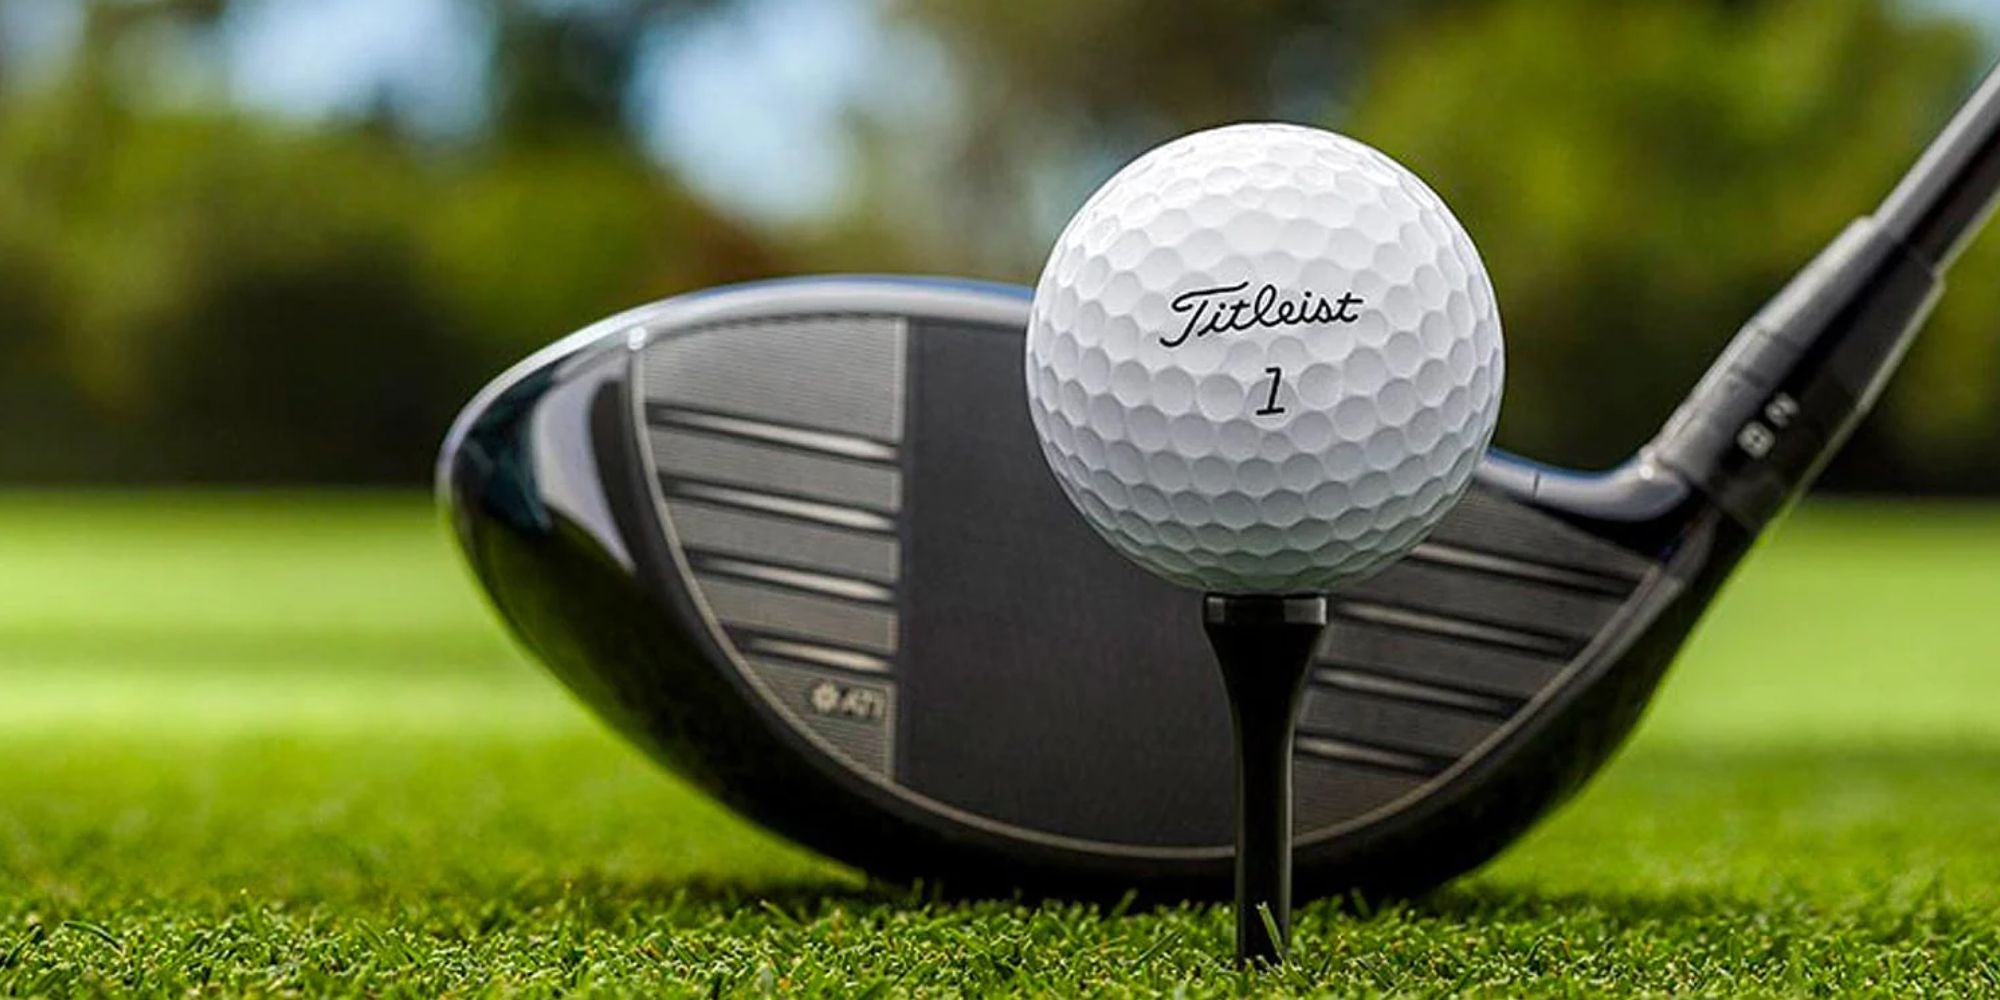 Let's talk about Titleist